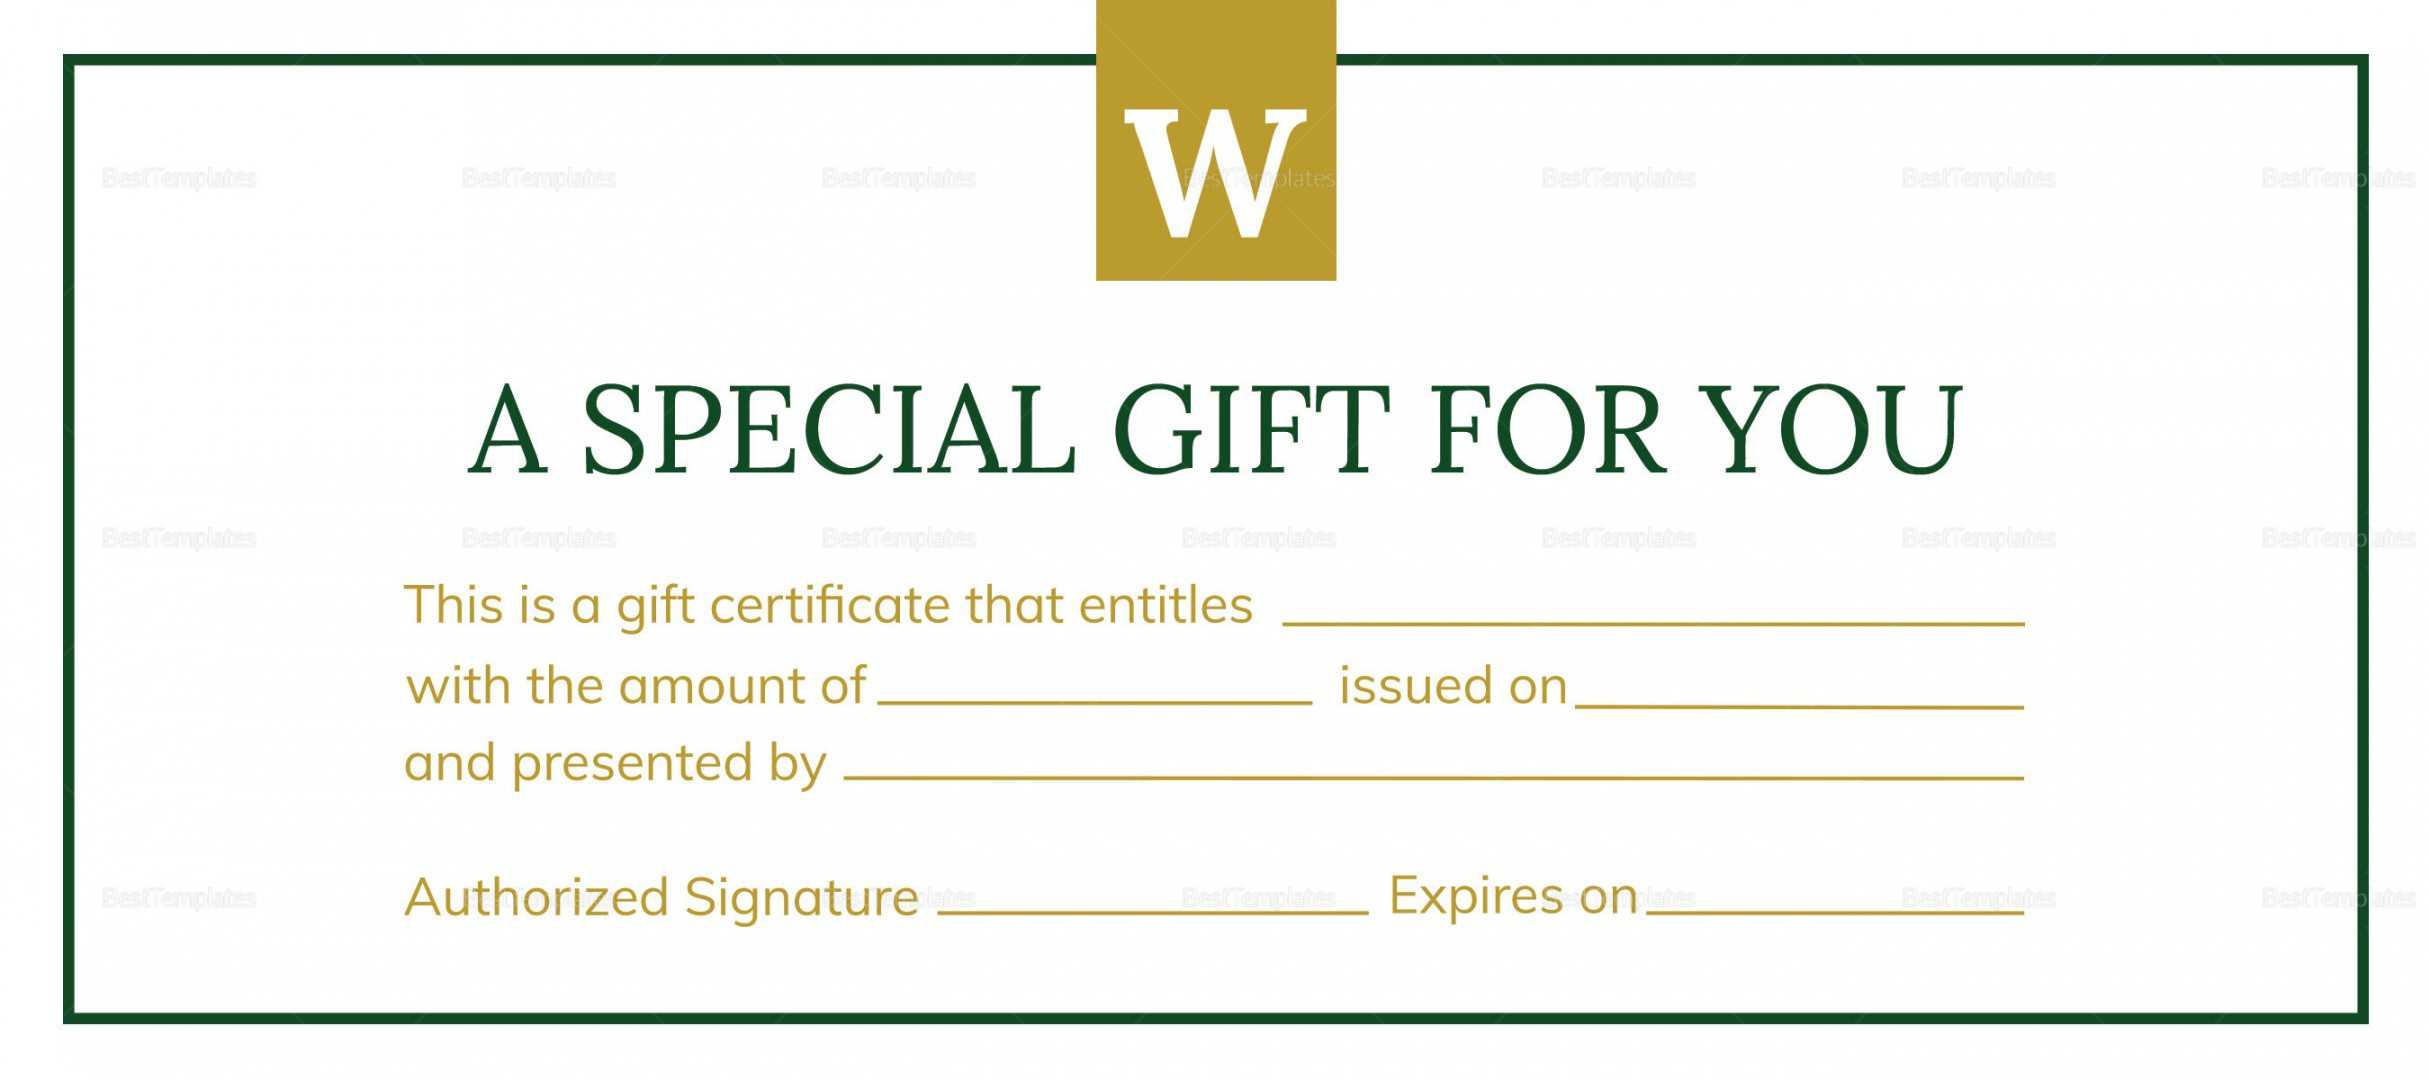 Hotel Gift Certificate Template With Regard To This Entitles The Bearer To Template Certificate